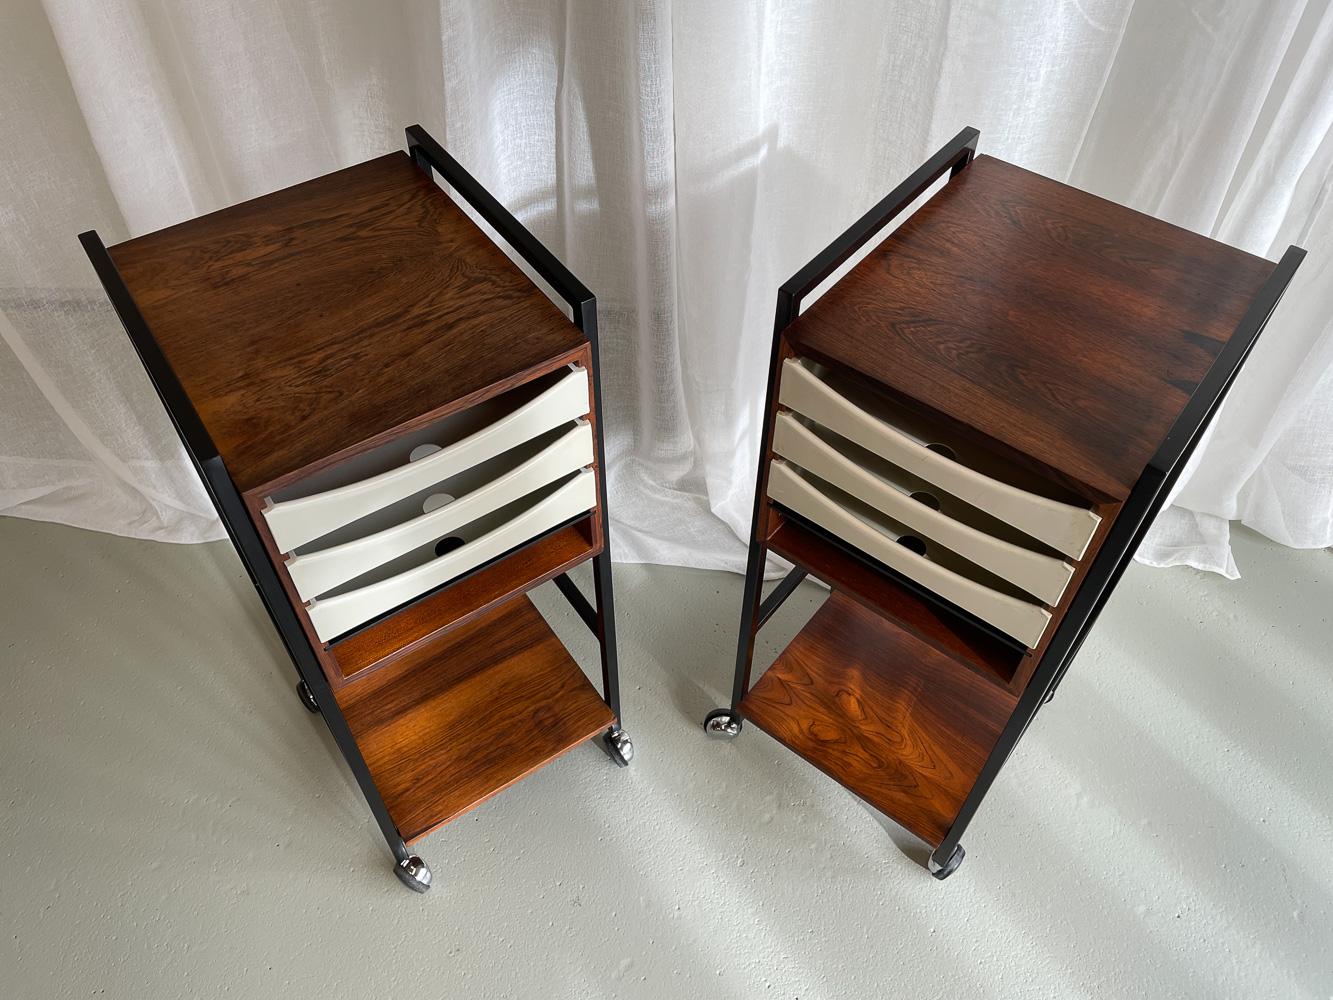 Vintage Danish Rosewood Drawer Units by Stil i Stål Denmark, 1960s. Set of 2. In Good Condition For Sale In Asaa, DK